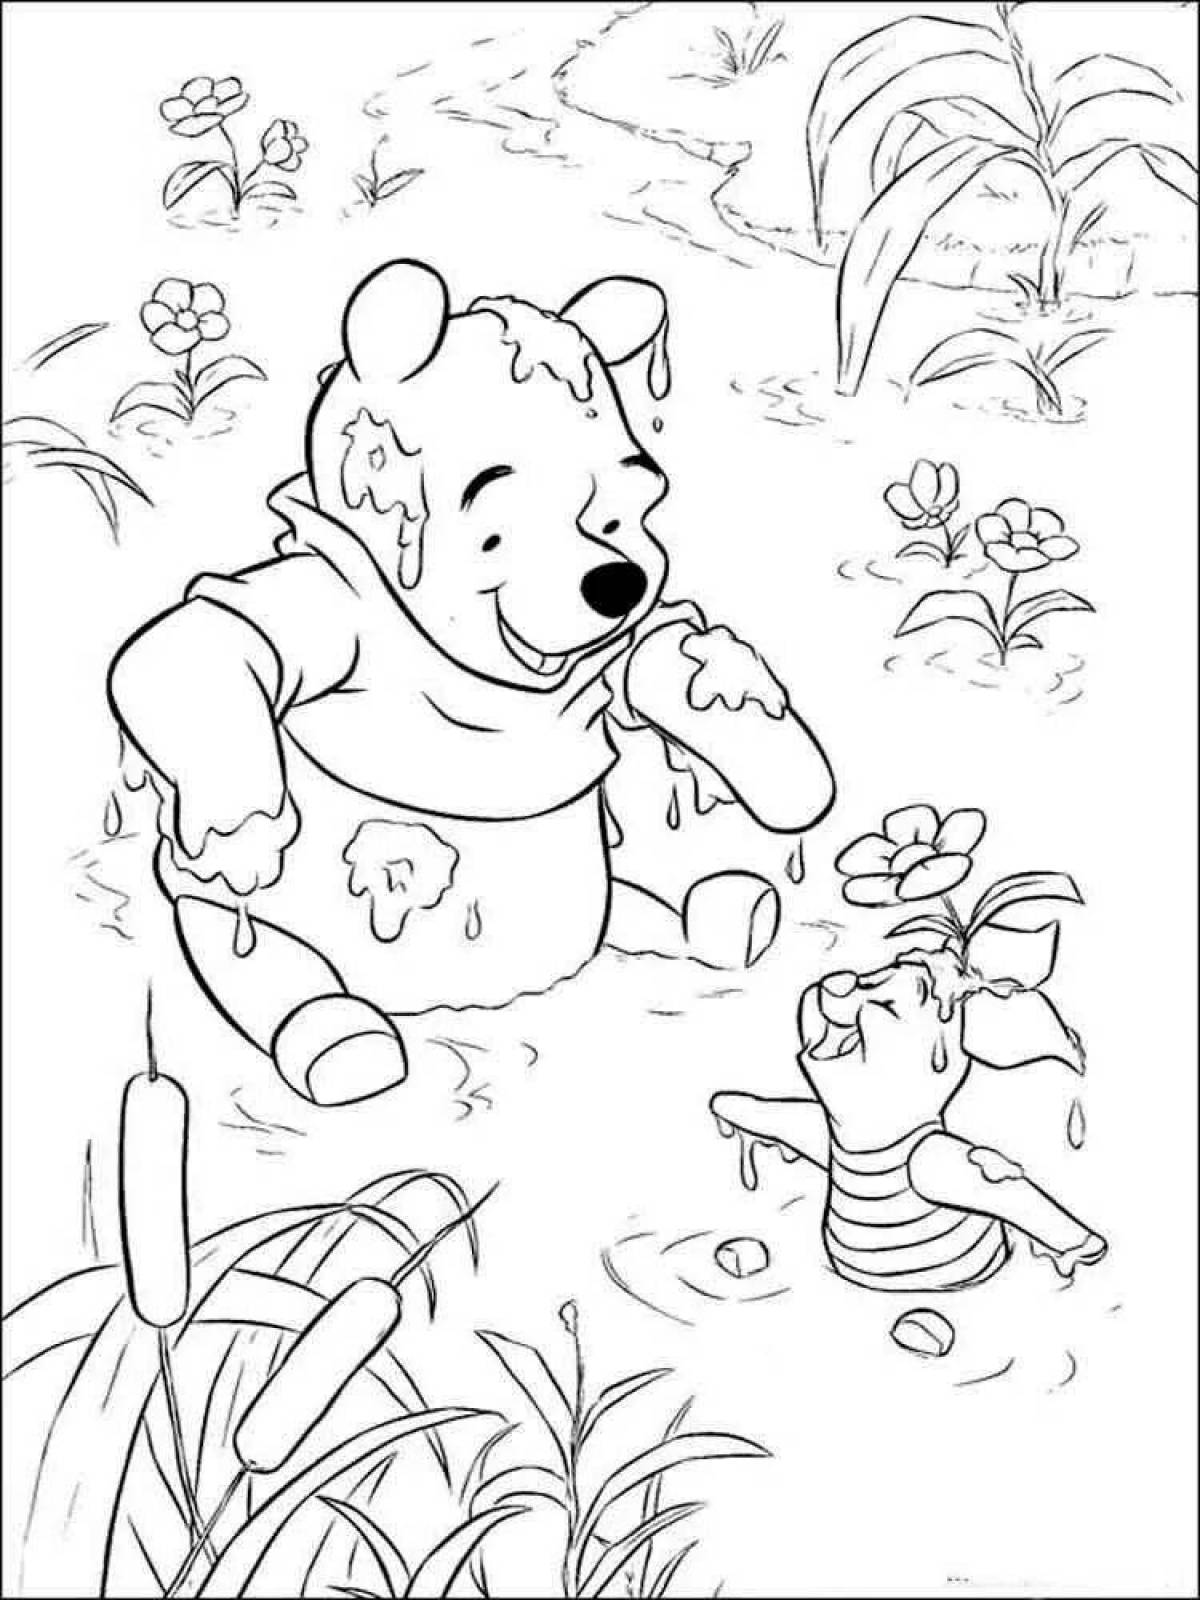 Jolly winnie the pooh game